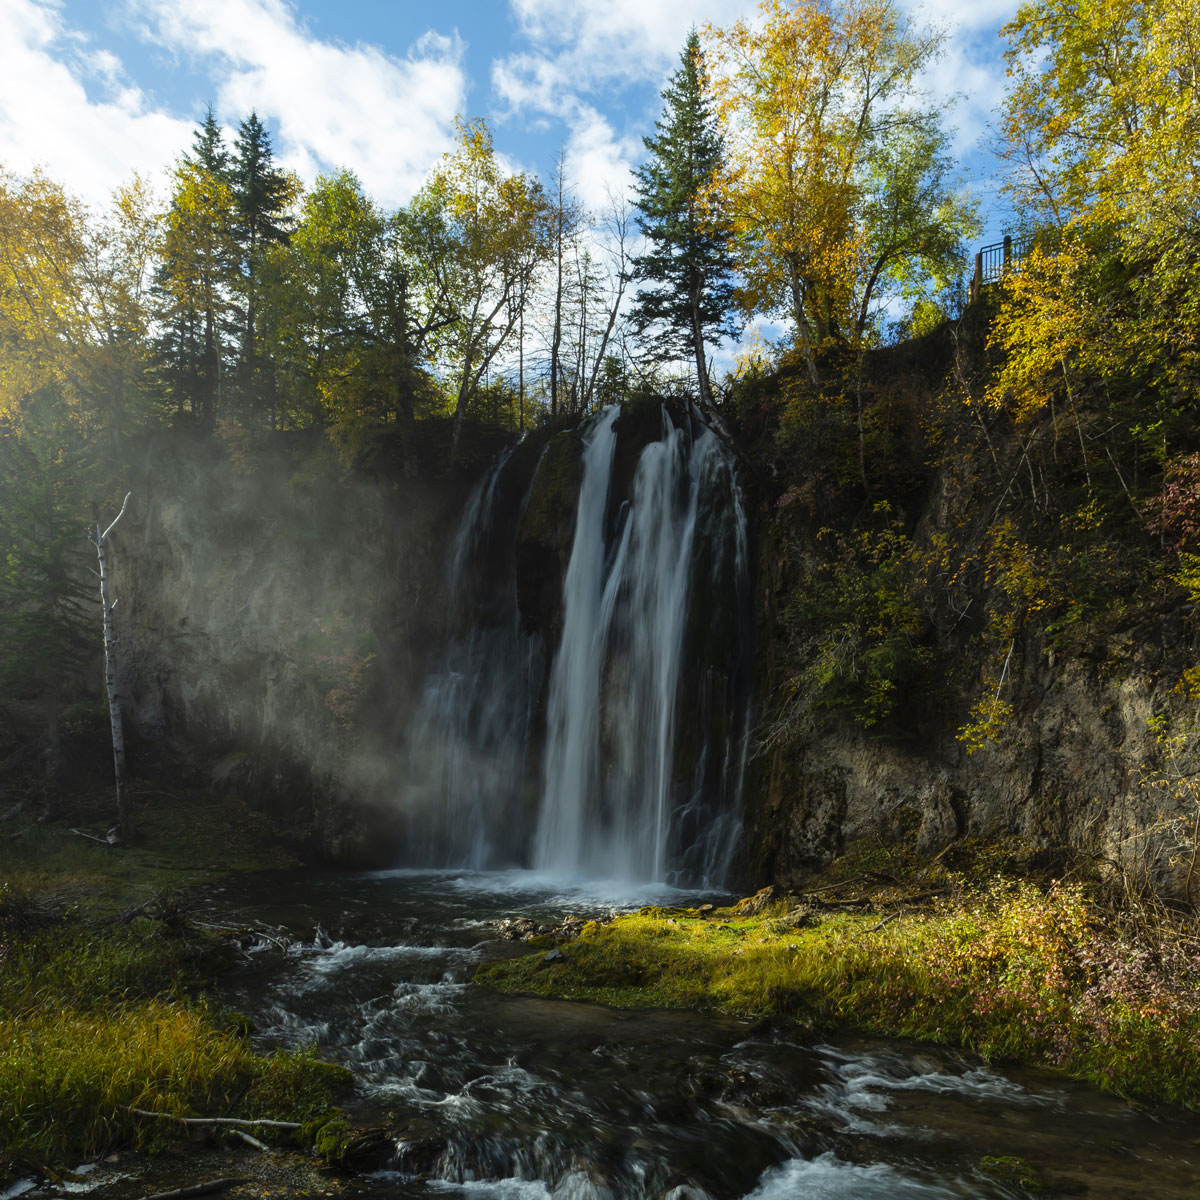 Under a blue sky with puffy white clouds early morning Autumn sunlit glistens on a silvery mist cast by a falling rush of water at Spearfish Falls in Spearfish Canyon, South Dakota.